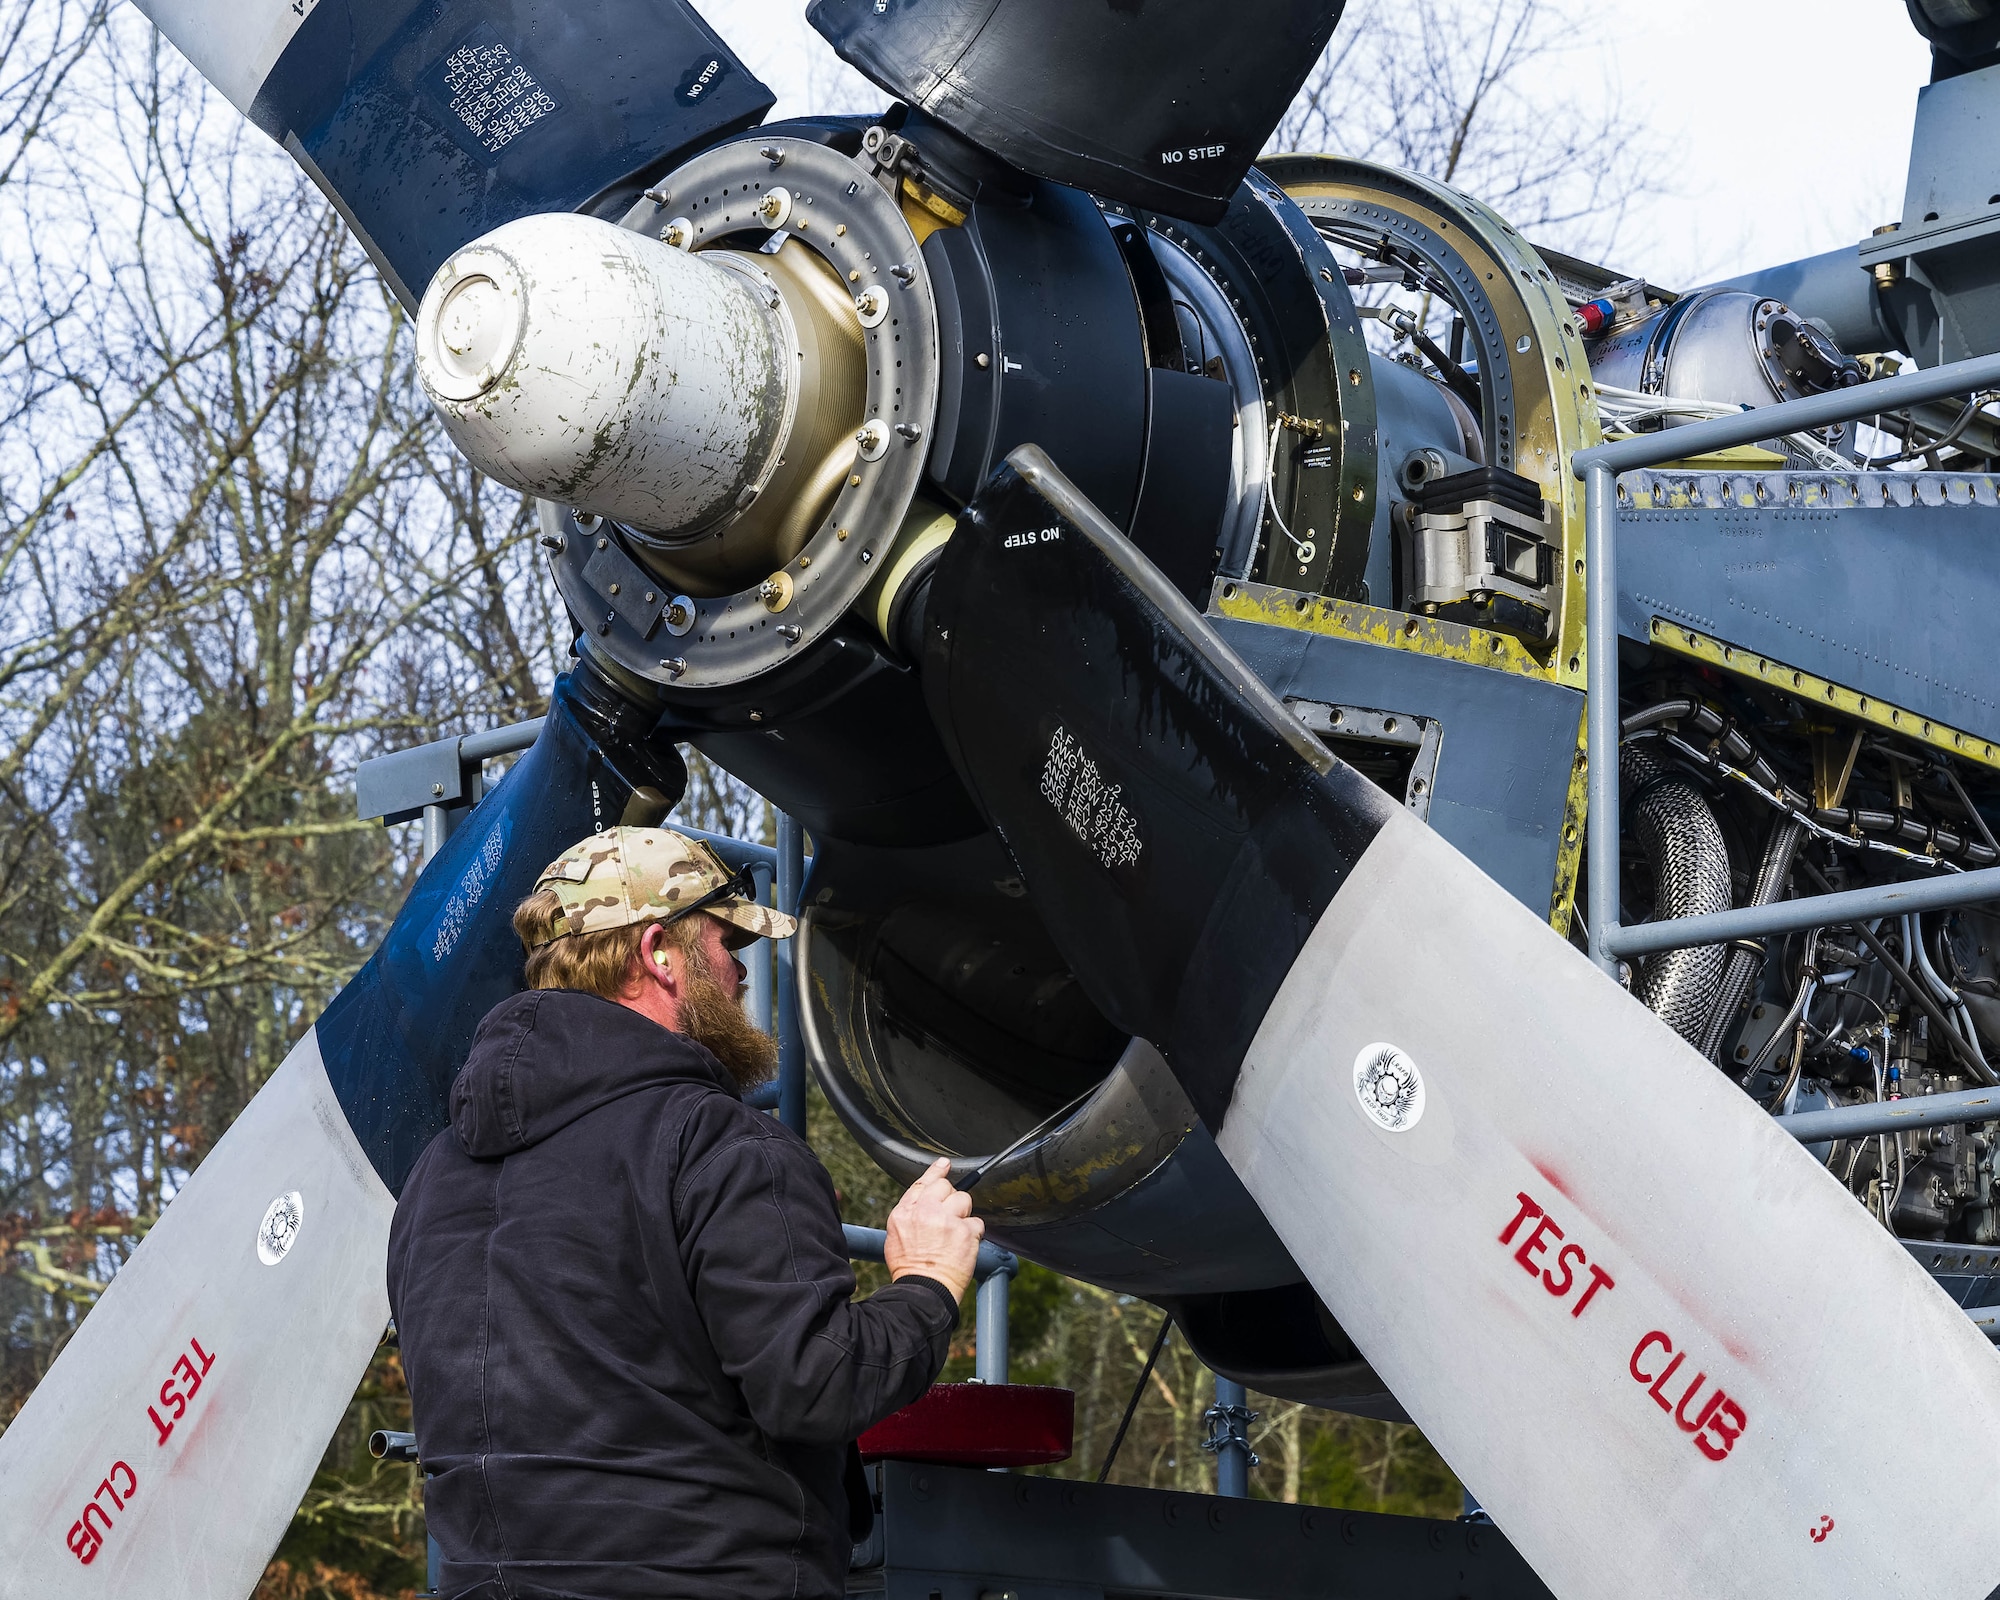 Todd Jobst, Contract Field Team member, inspects the air intake of a newly upgraded T-56 Rolls Royce 3.5 modified engine on Jan. 4, 2021, at Little Rock Air Force Base, Ark. An operational check out of all engine and propeller systems are performed, to ensure the systems meet performance specifications before delivery to an Air Force Reserve or Air National Guard C-130H Hercules squadron. Contracted mechanics at the engine test cell facility ensure each engine is serviceable, troubleshoots any issues, and performs additional inspections. (U.S. Air Force Reserve photo by Maj. Ashley Walker)